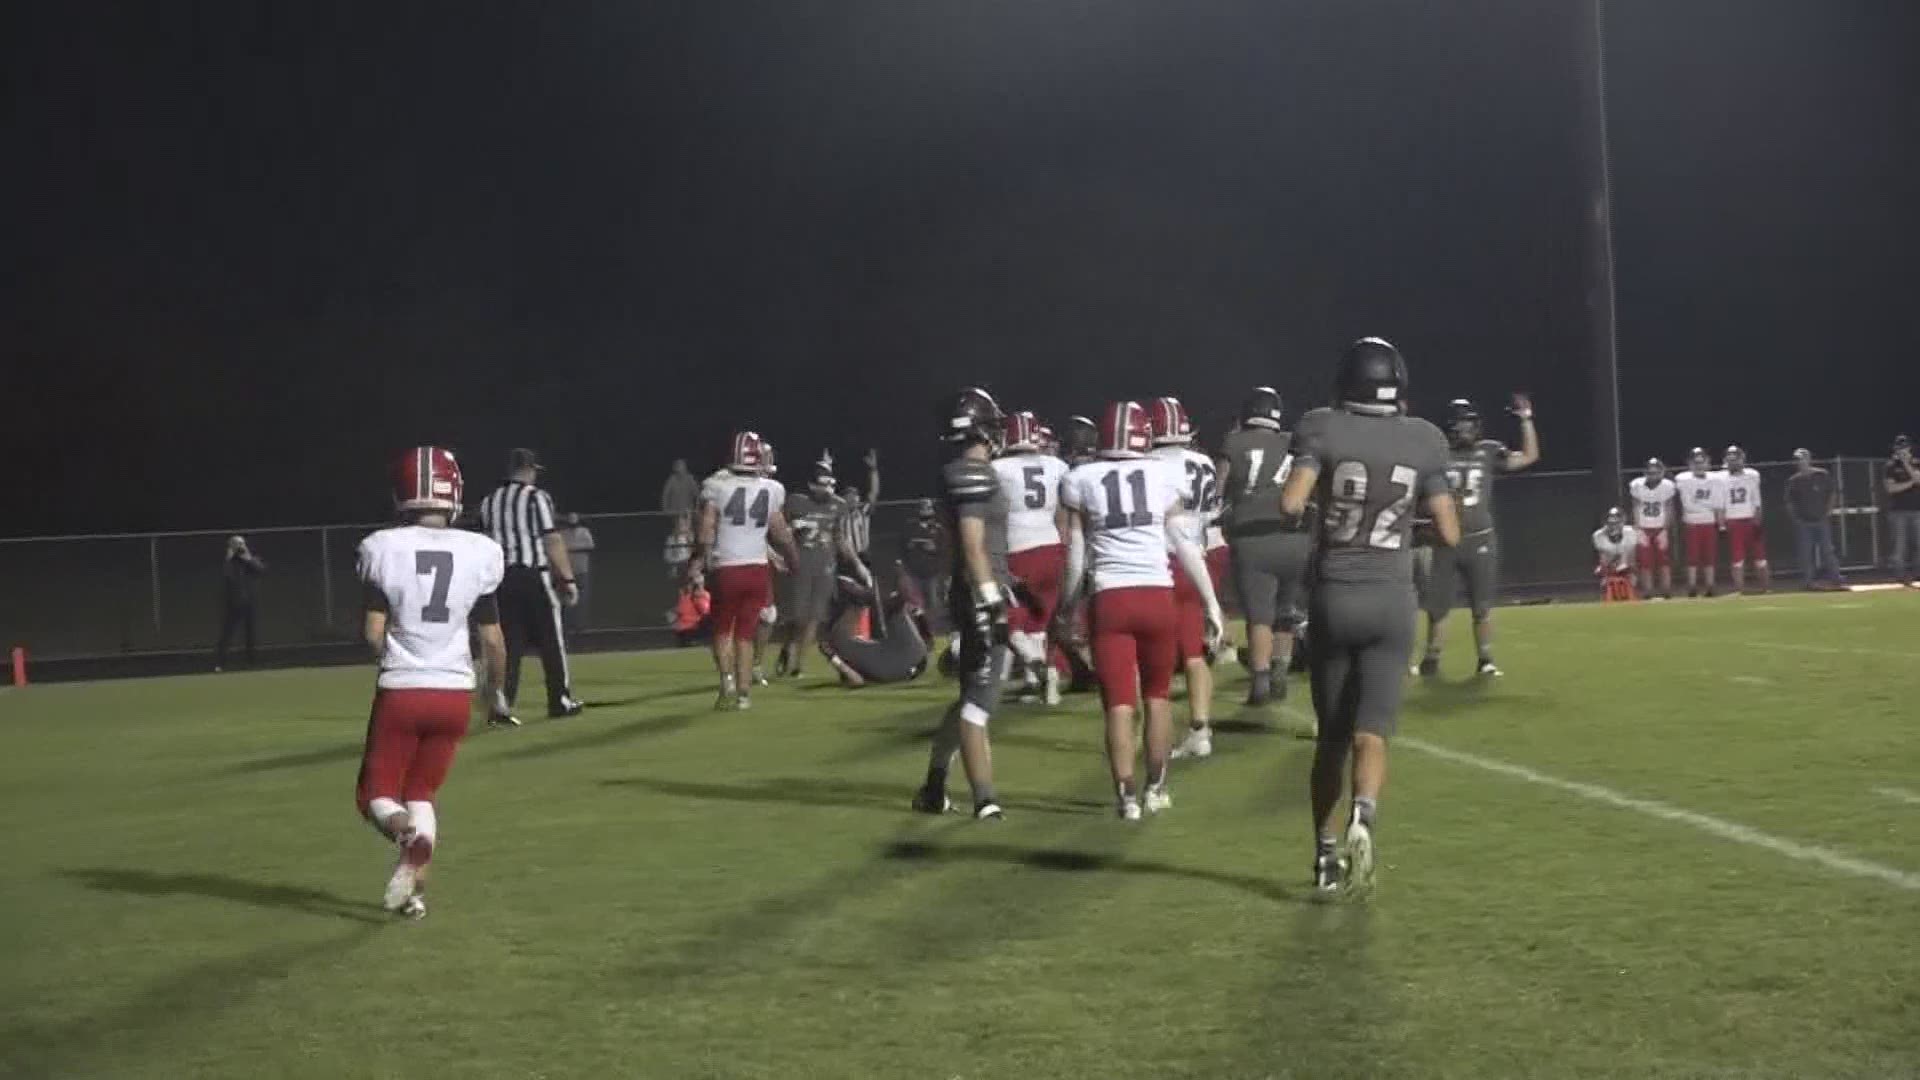 Highlights from Allendale vs. Spring Lake